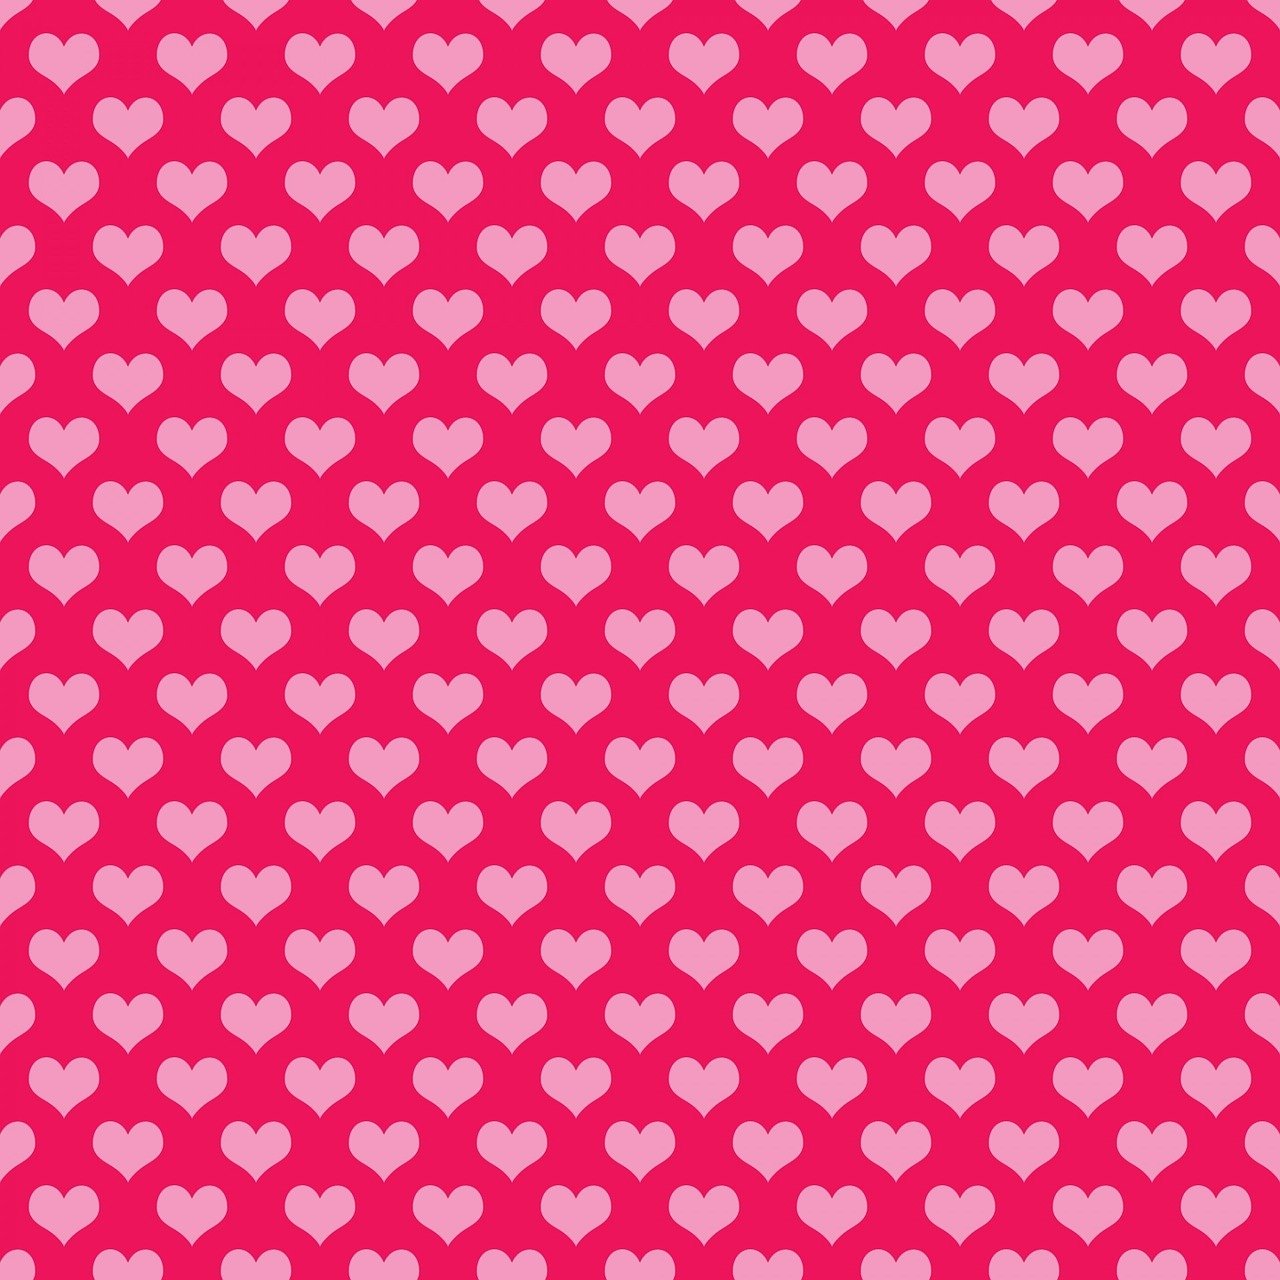 a pattern of pink hearts on a pink background, inspired by Peter Alexander Hay, trending on pixabay, sprite sheet, 2 0 5 6 x 2 0 5 6, dark backgroud, damask pattern